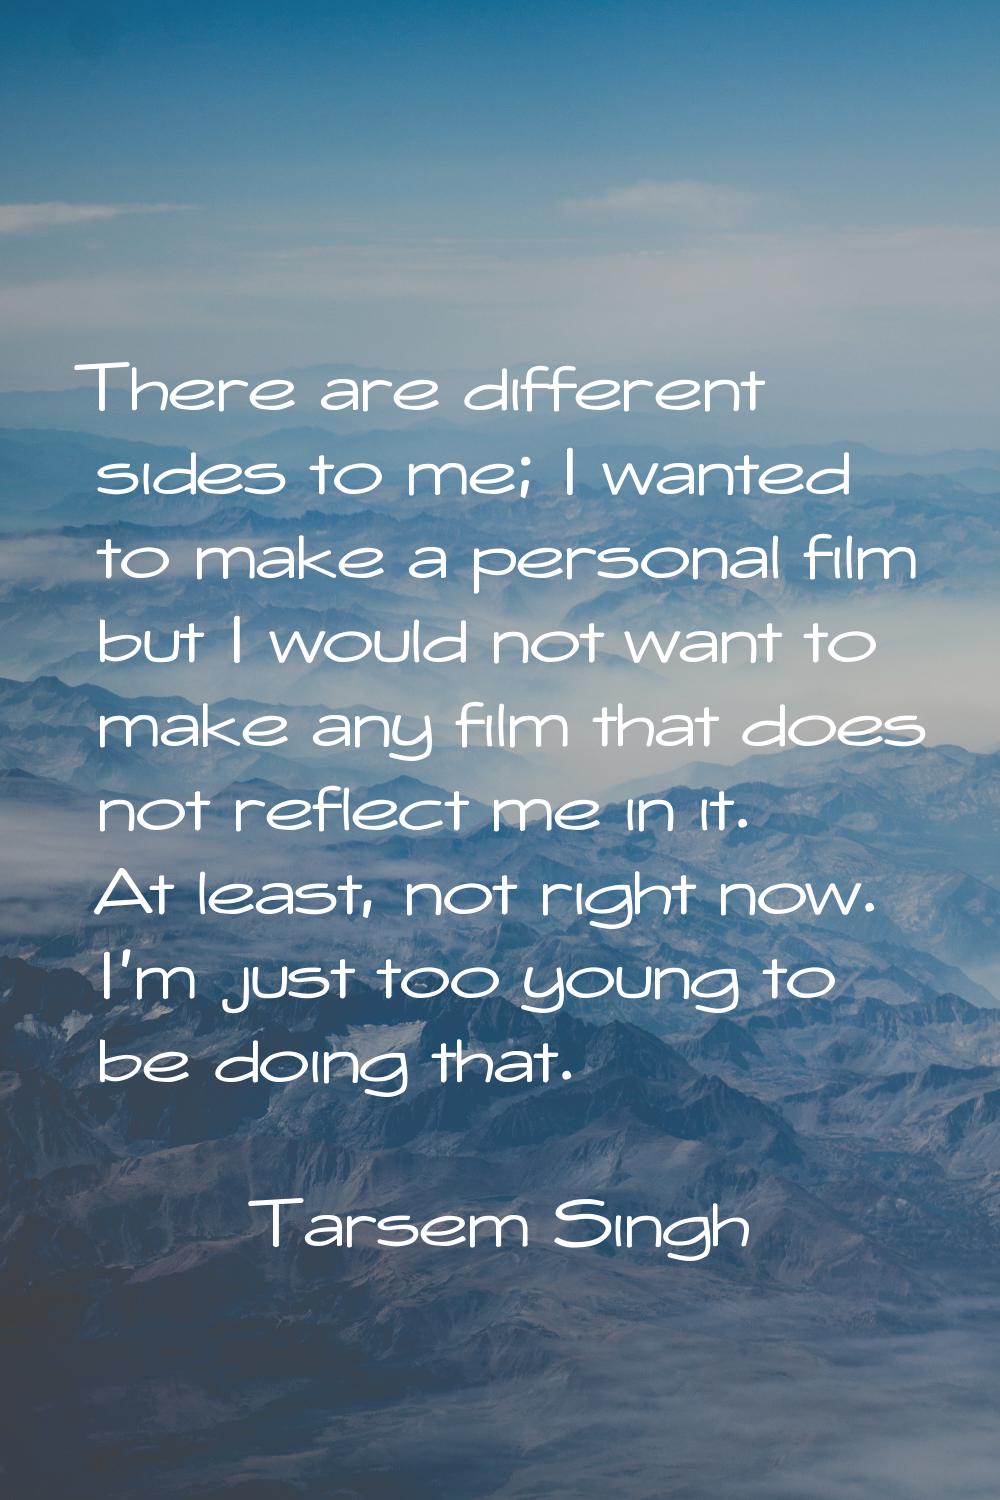 There are different sides to me; I wanted to make a personal film but I would not want to make any 